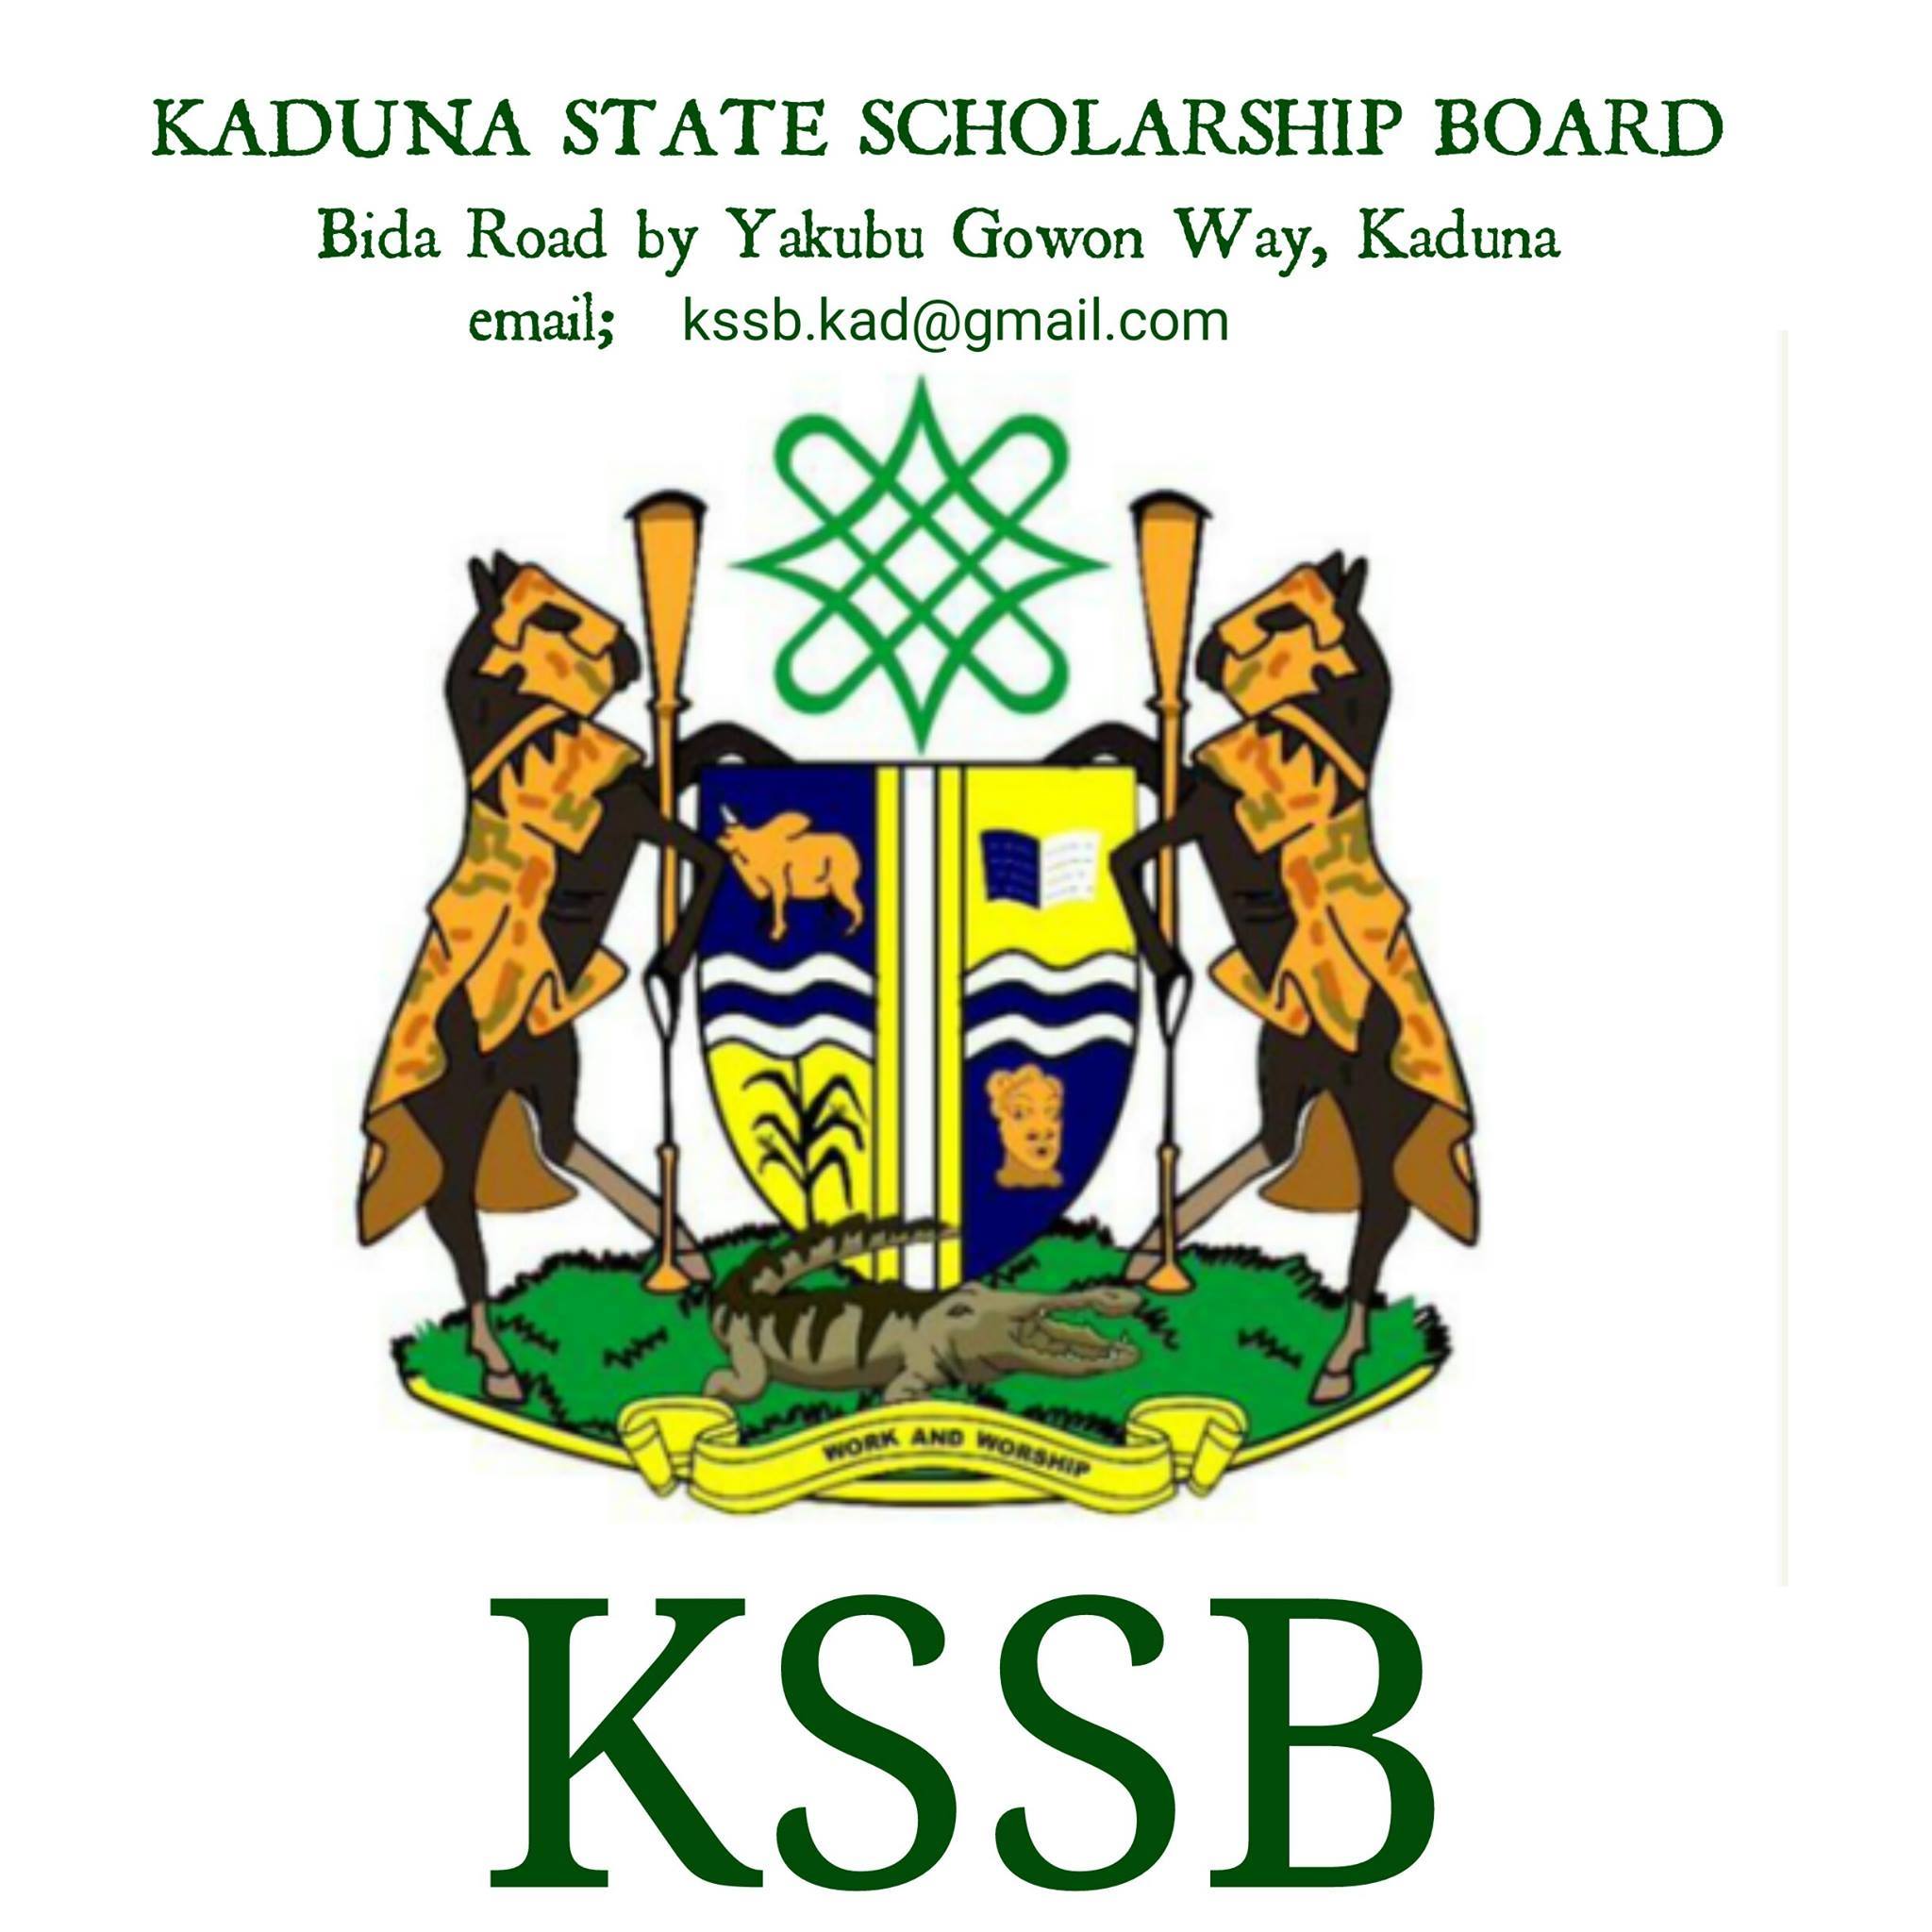 List of Candidates Shortlisted for Kaduna State Scholarship CBT